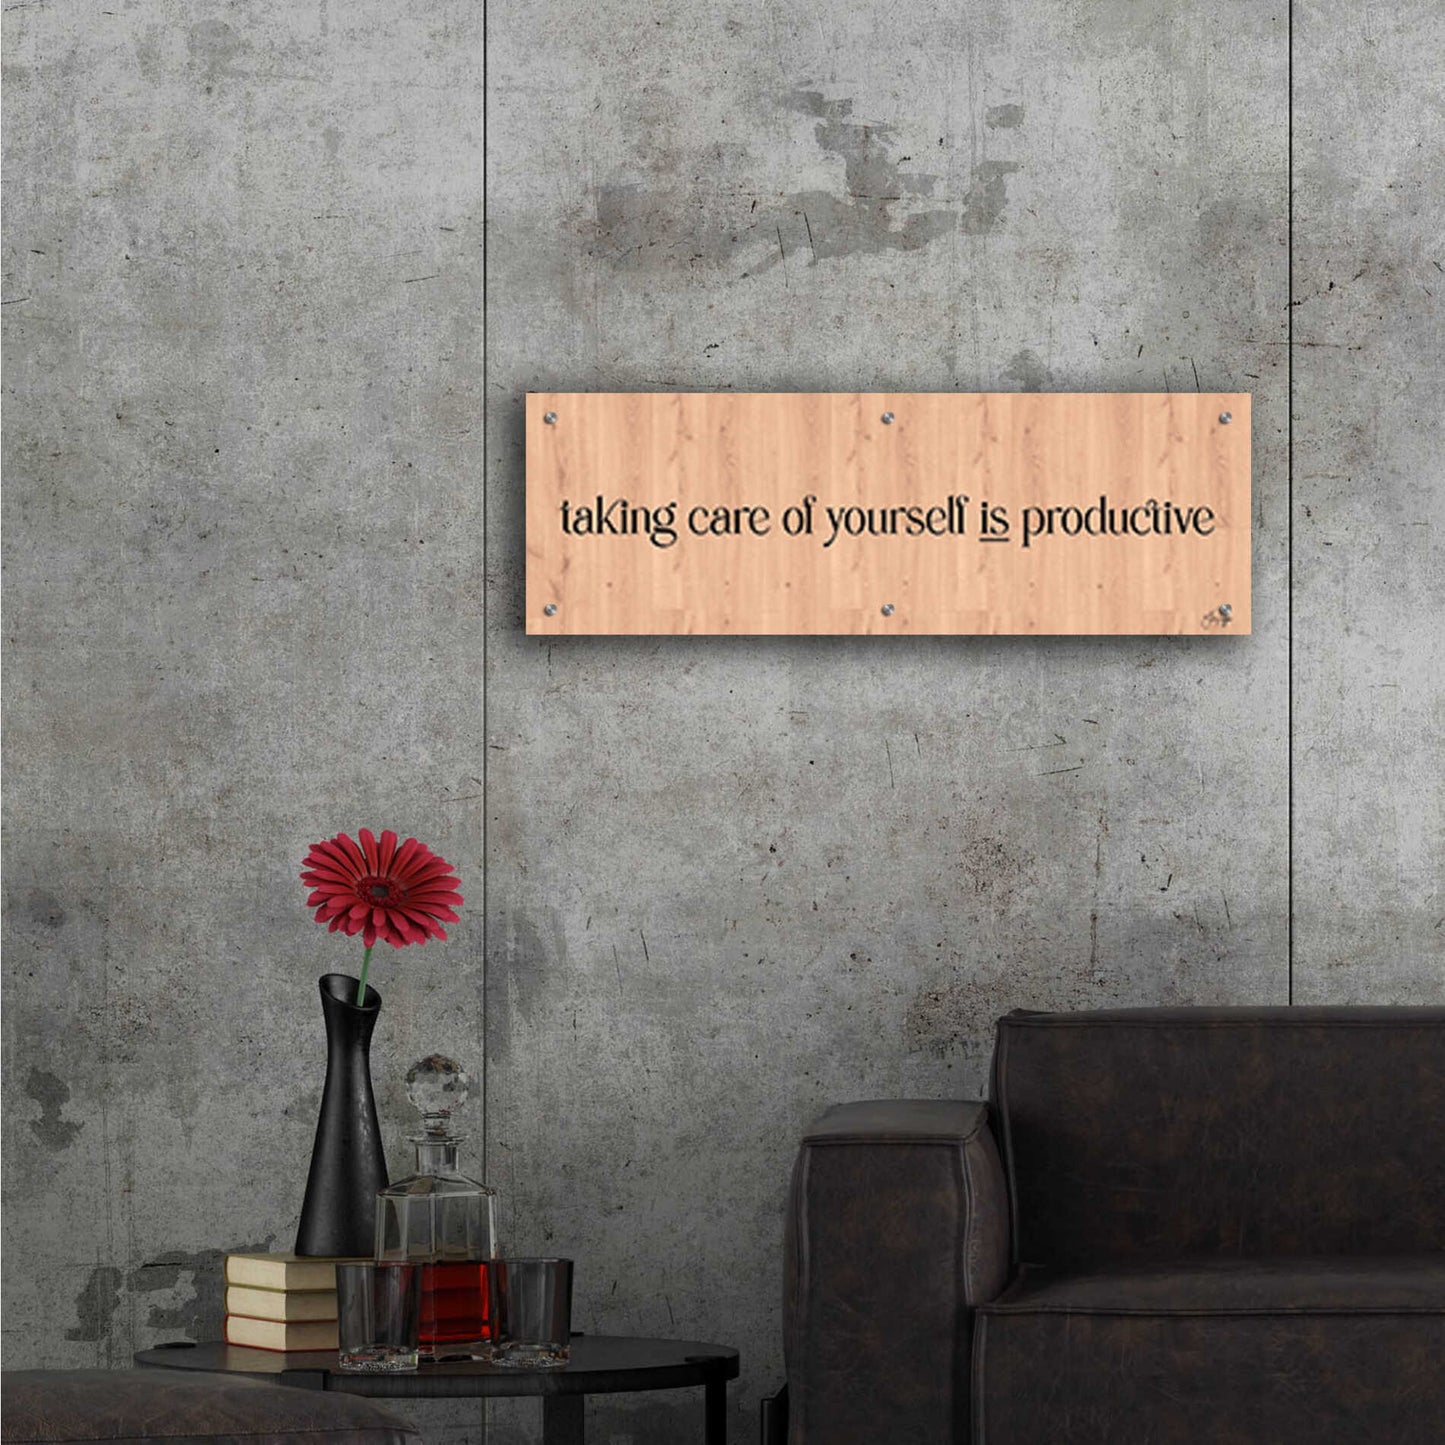 Epic Art 'Taking Care of Yourself is Productive' by Yass Naffas Designs, Acrylic Glass Wall Art,36x12